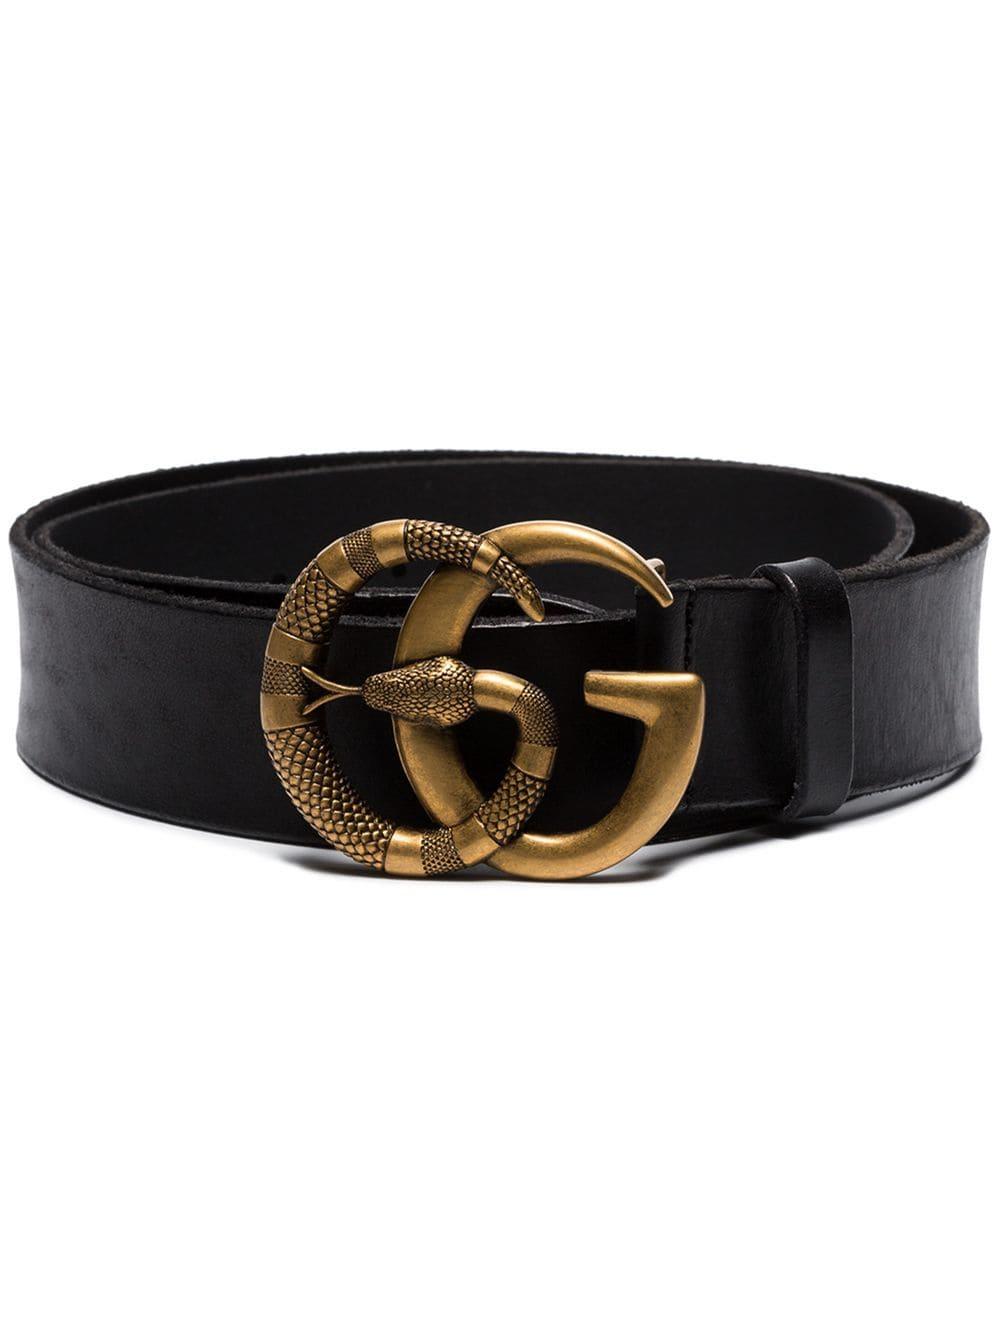 Gucci Leather Double G Snake Buckle Belt in Black for Men - Lyst